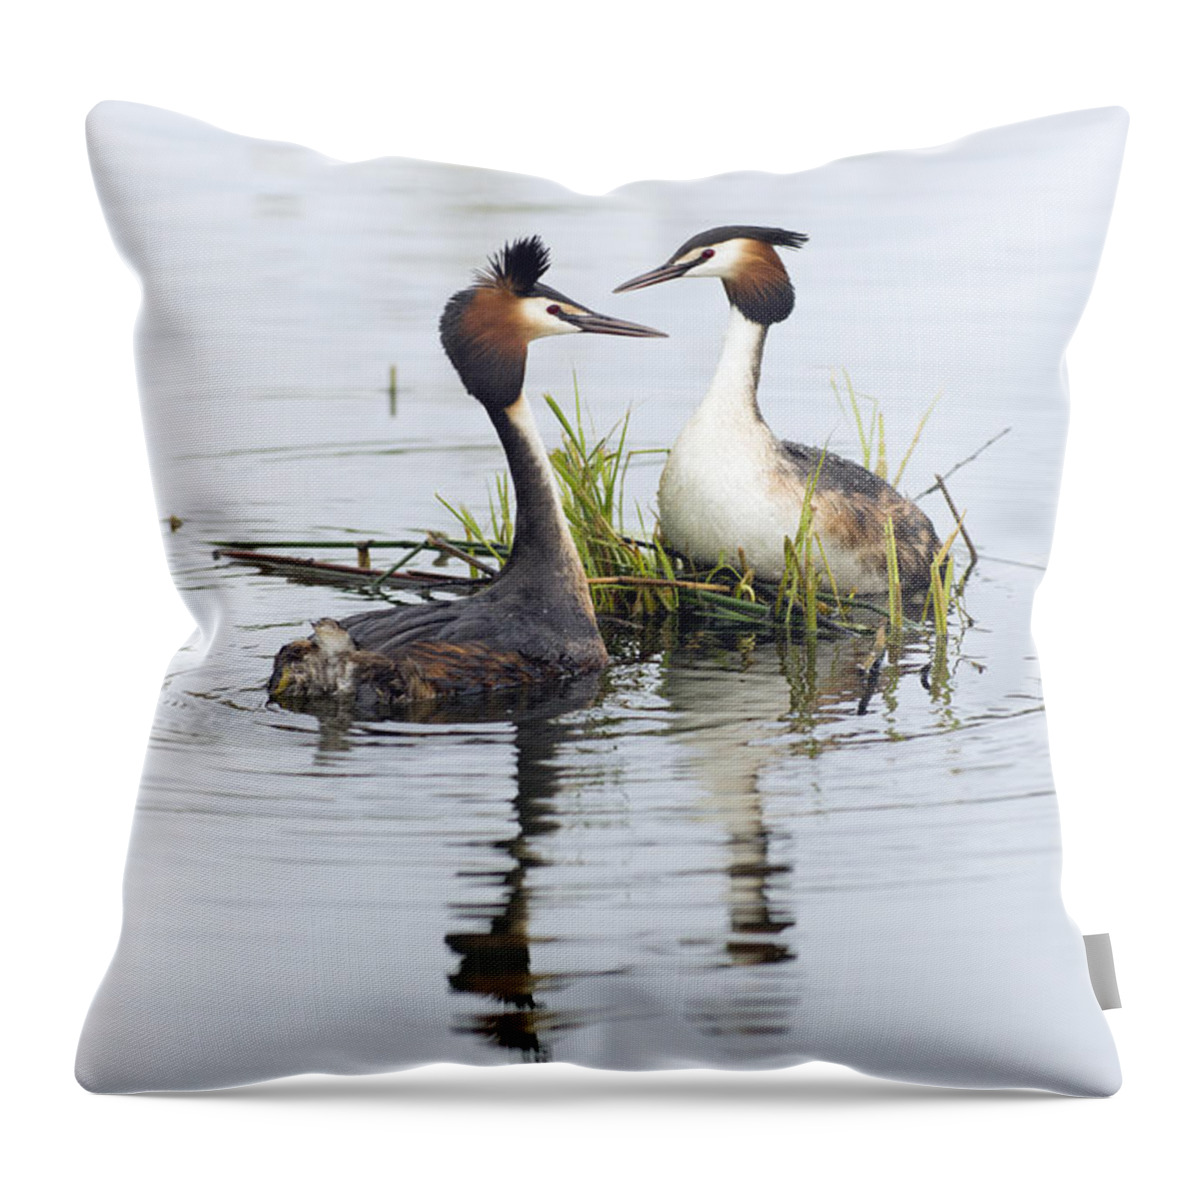 535641 Throw Pillow featuring the photograph Great Crested Grebe Pair Dislaying by Duncan Usher